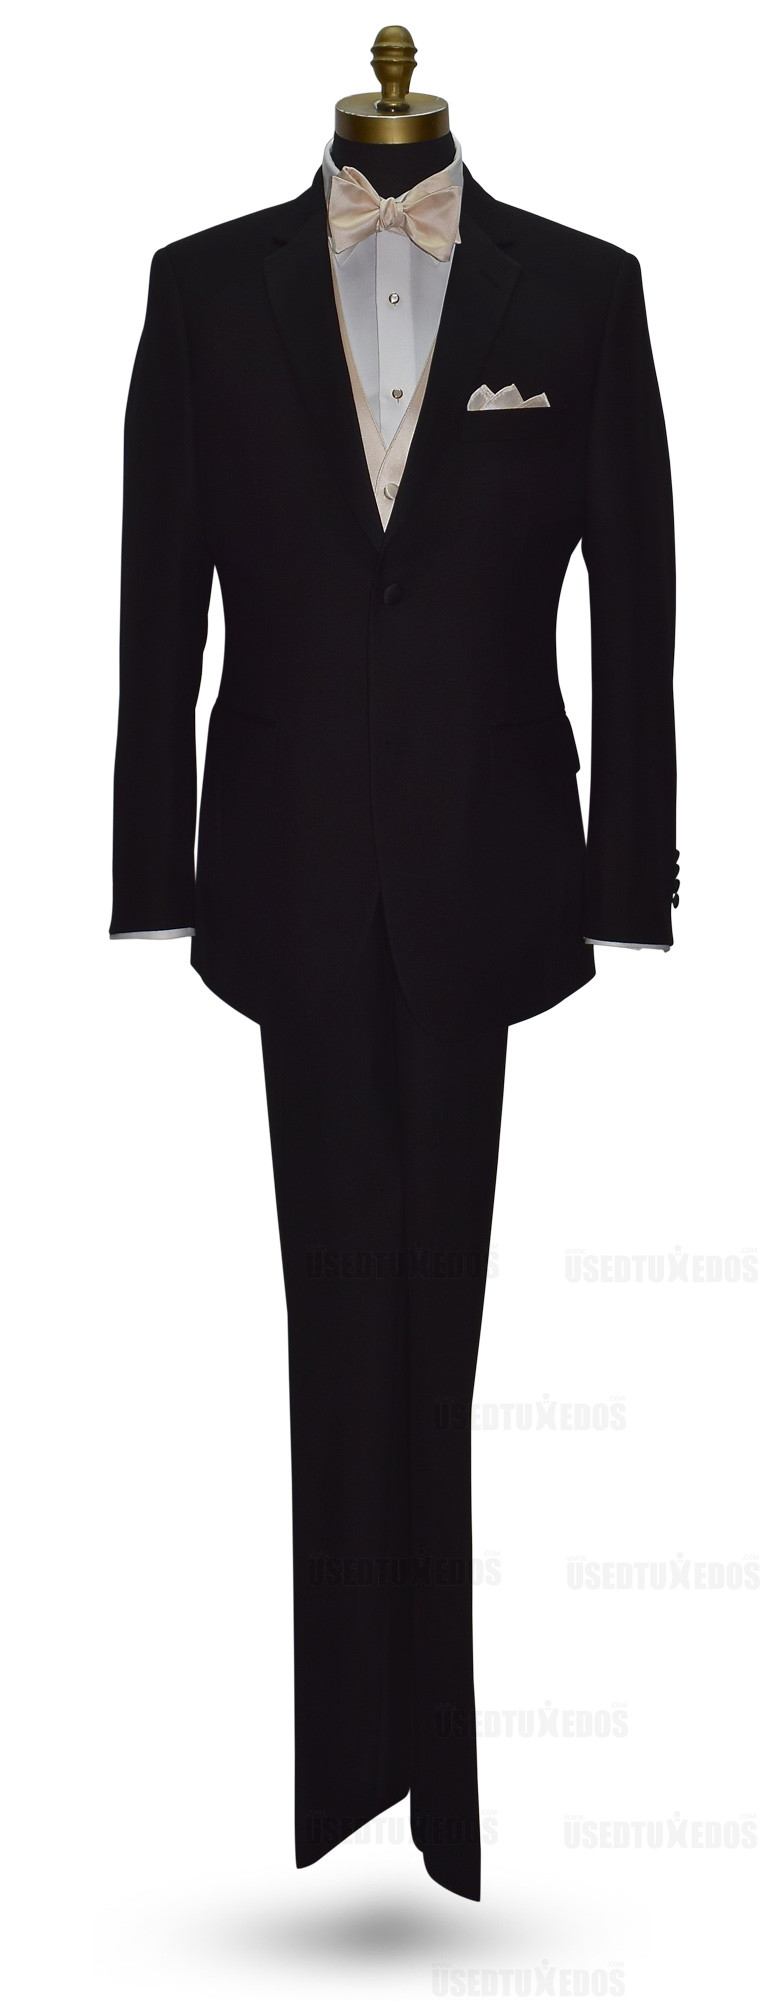 black wedding tuxedo with champagne vest and bowtie on tuxbling.com